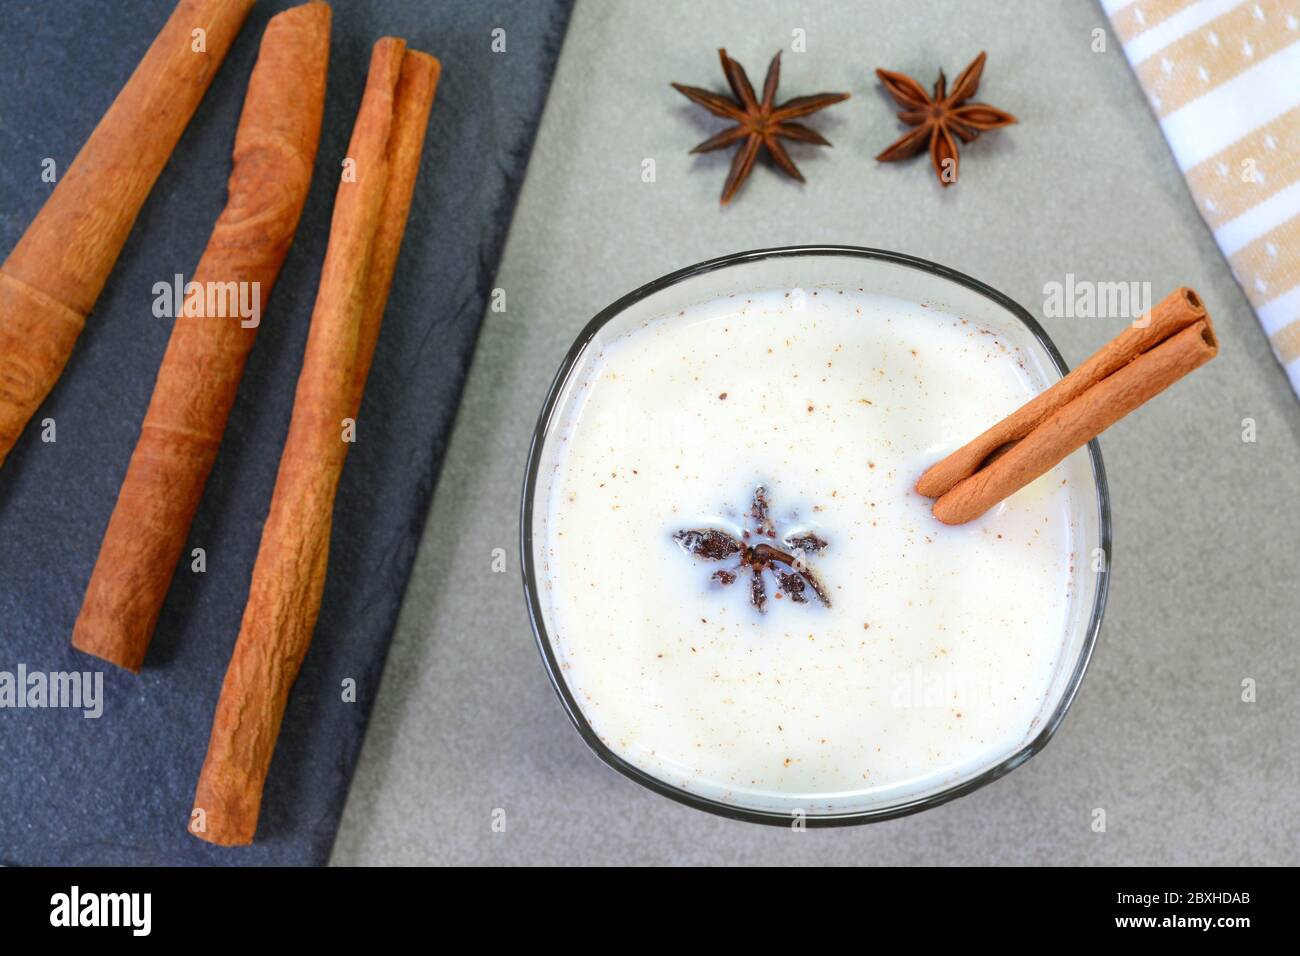 Hot cinnamon milk in a glass cup garnished with star anise Stock Photo